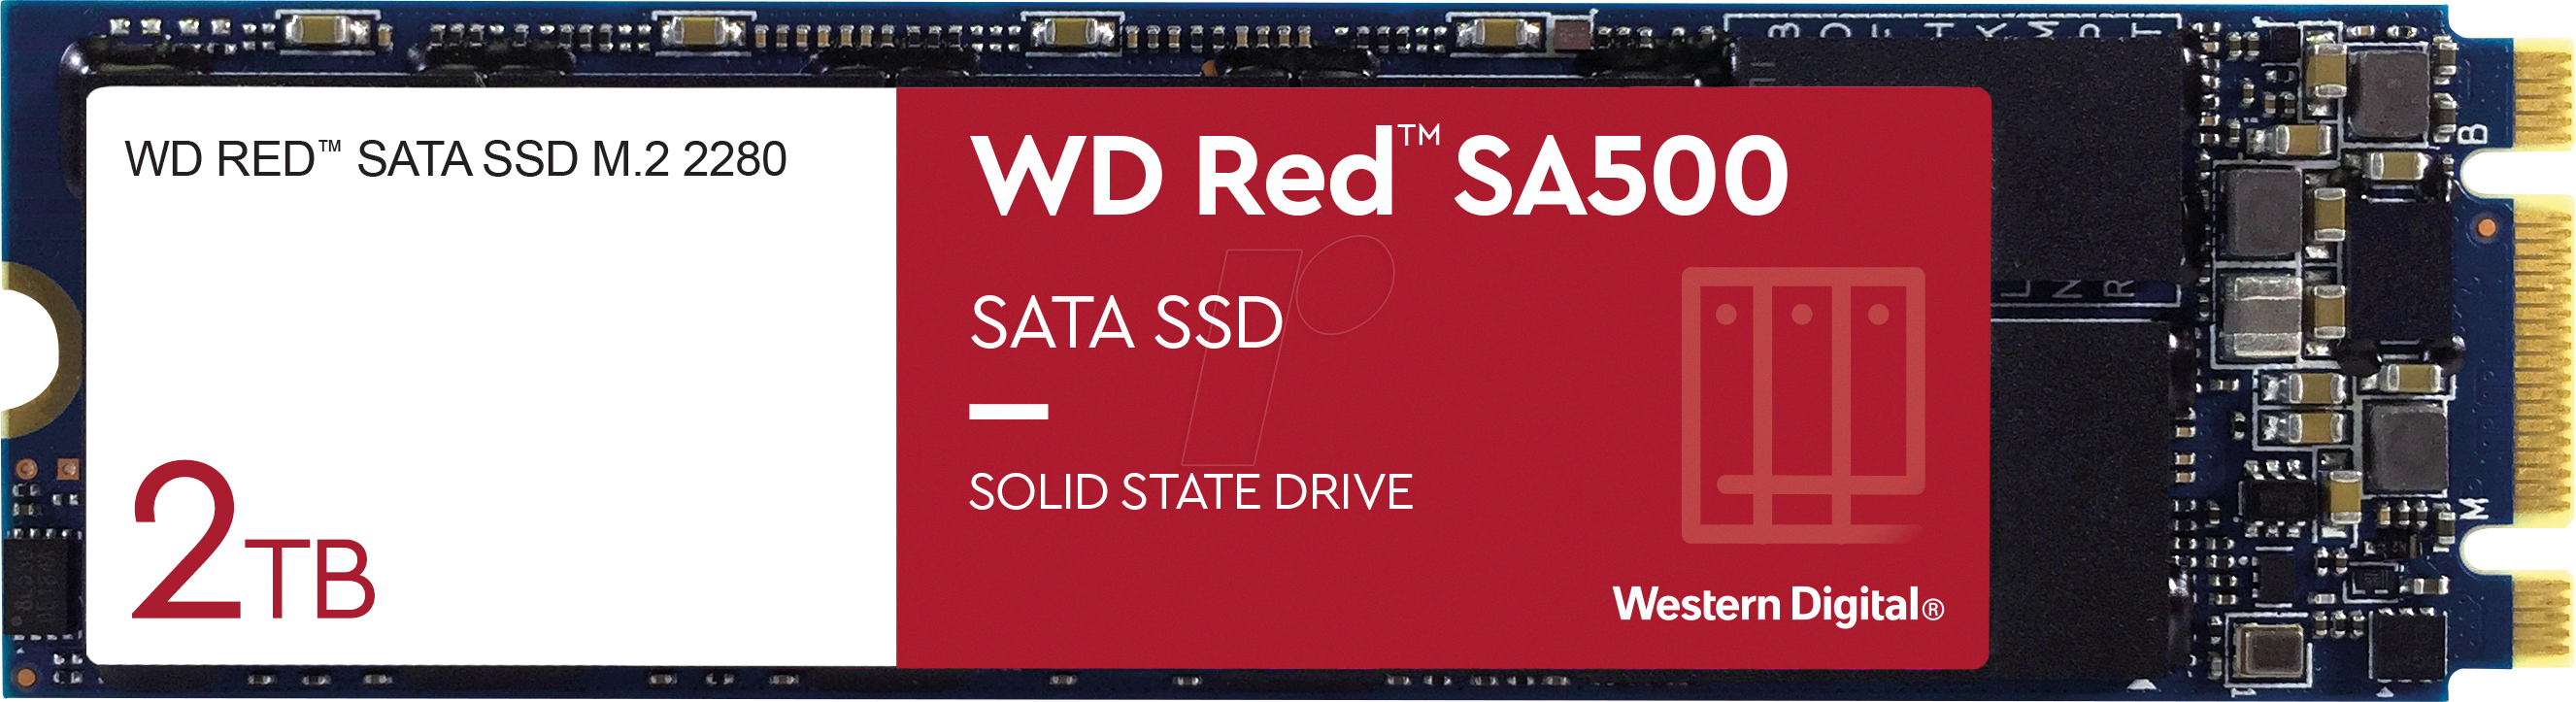 WD 2TB WD Red SA500 NAS 3D NAND Internal SSD - SATA III 6 Gb/s, M.2 2280, Up to 560 MB/s 